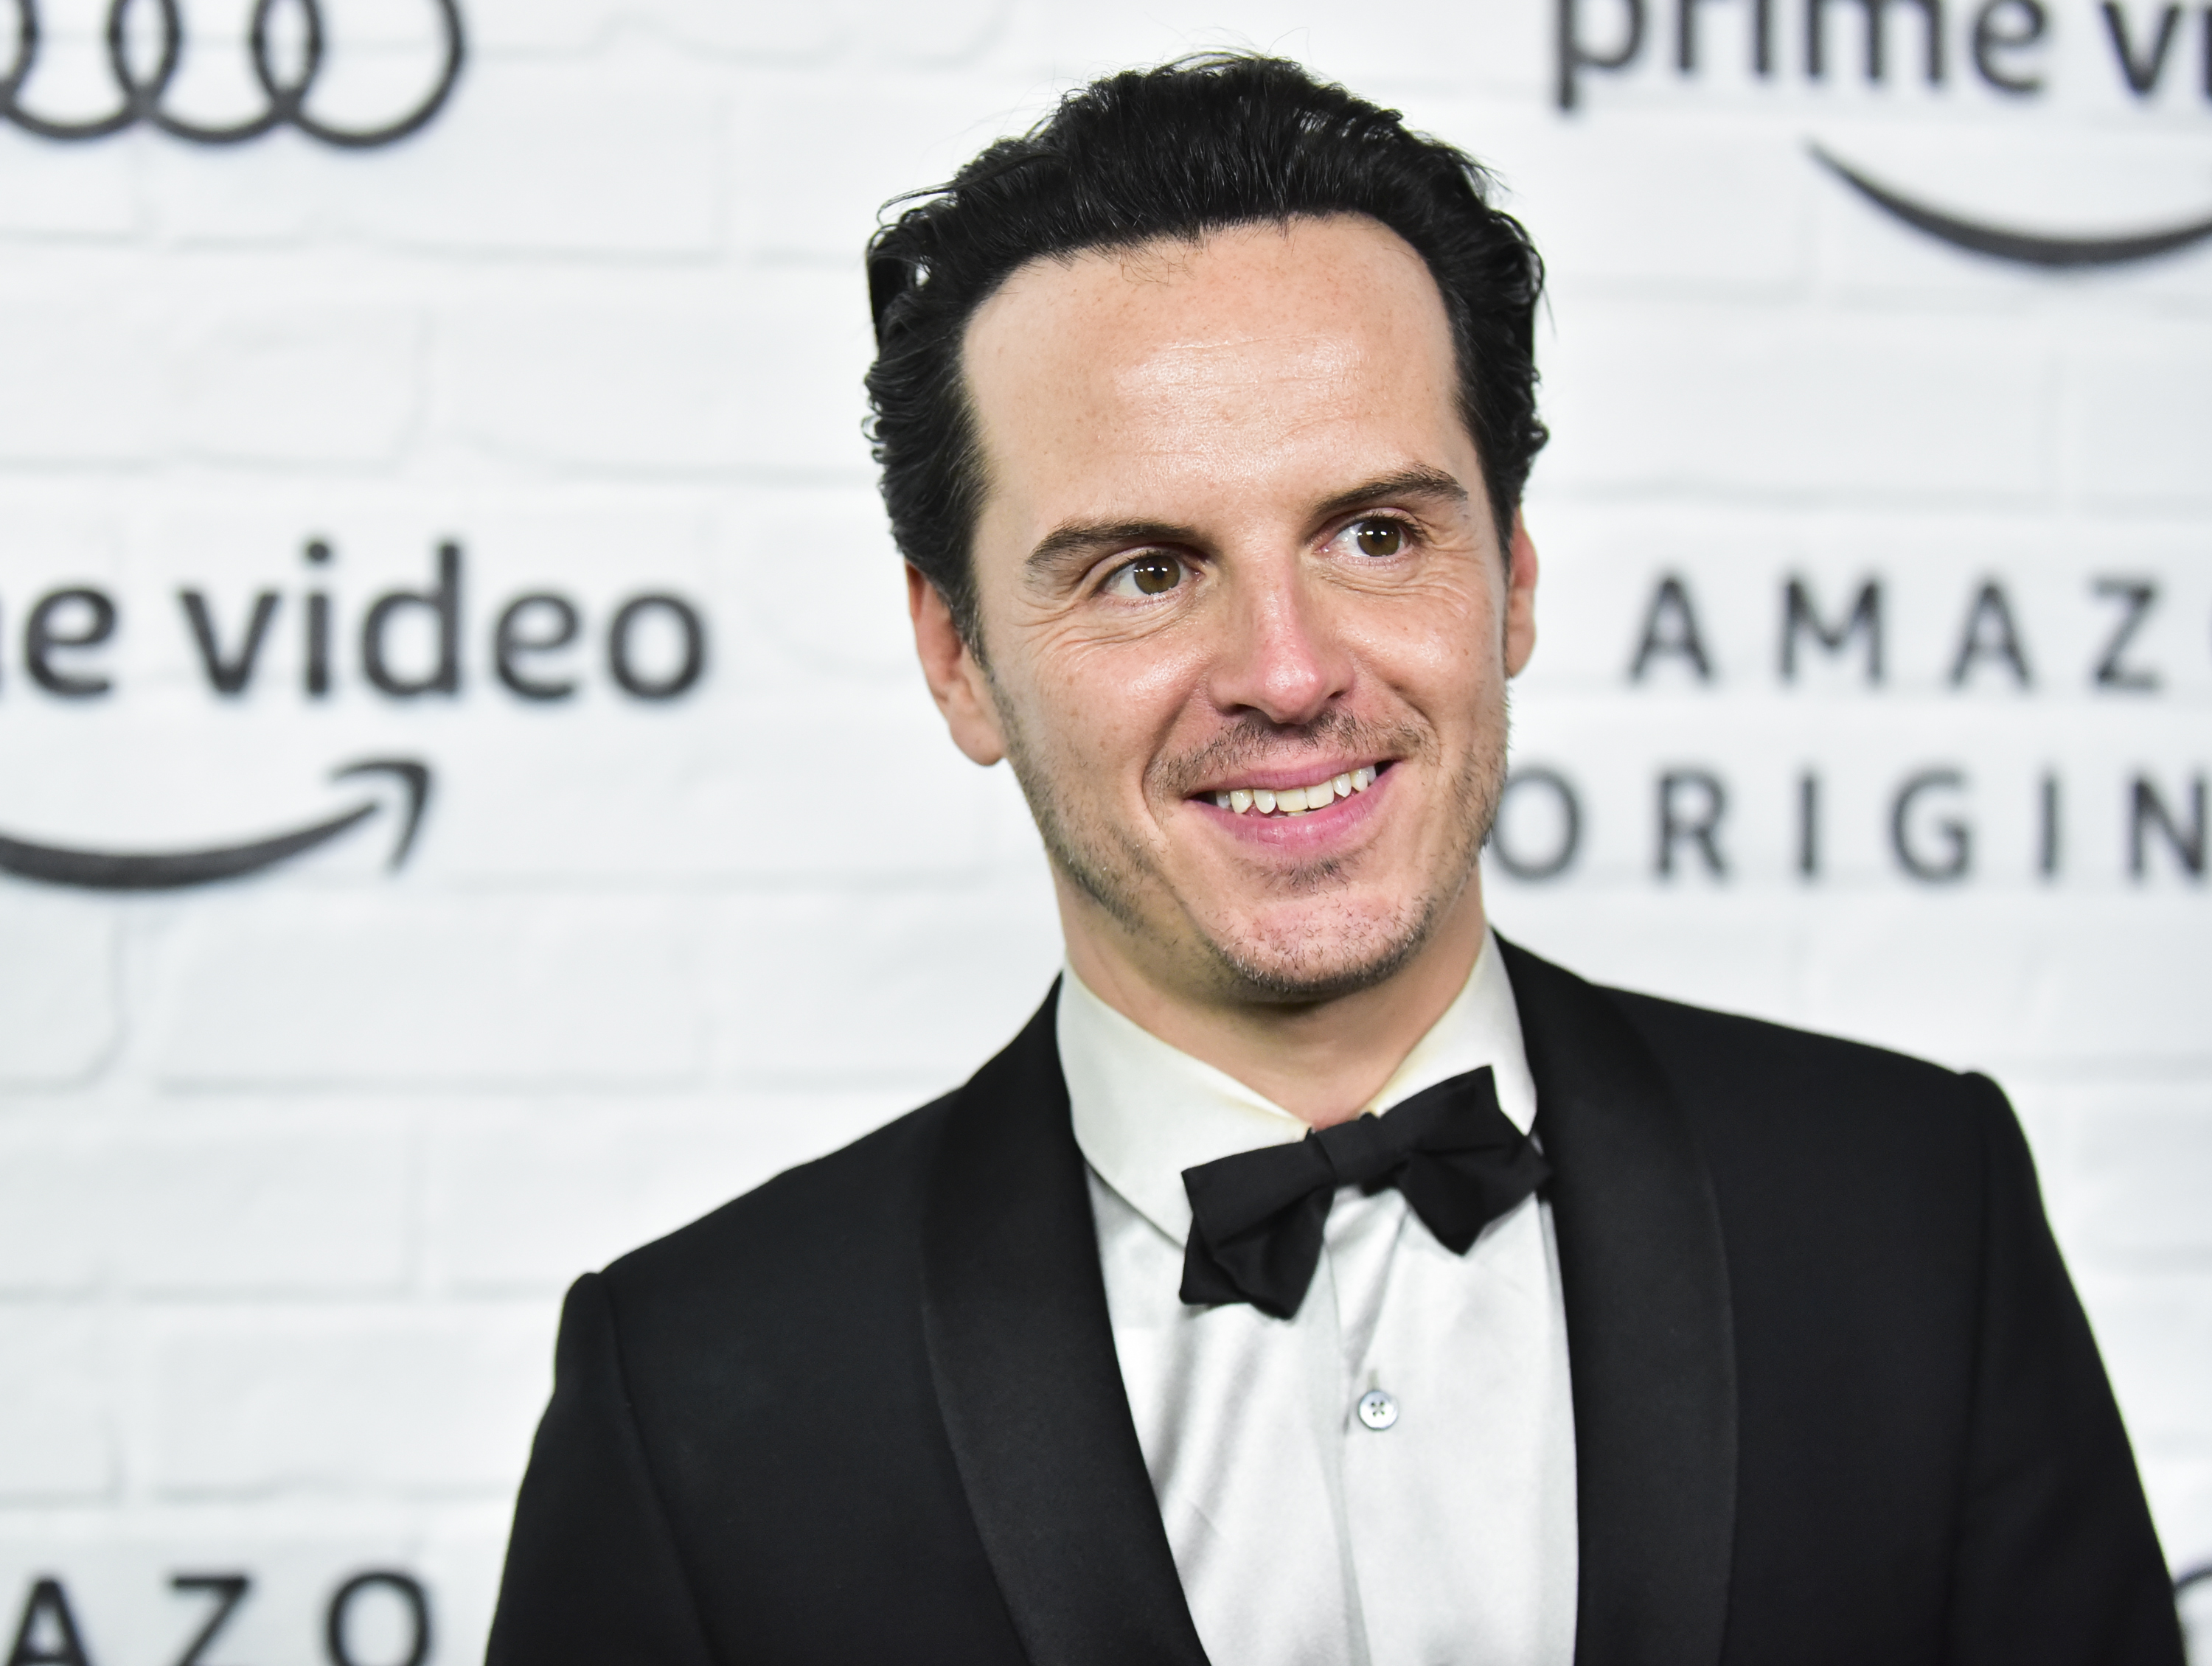 Andrew Scott attends the Amazon Prime Video Post Emmy Awards Party 2019 on September 22, 2019, in Los Angeles, California | Source: Getty Images